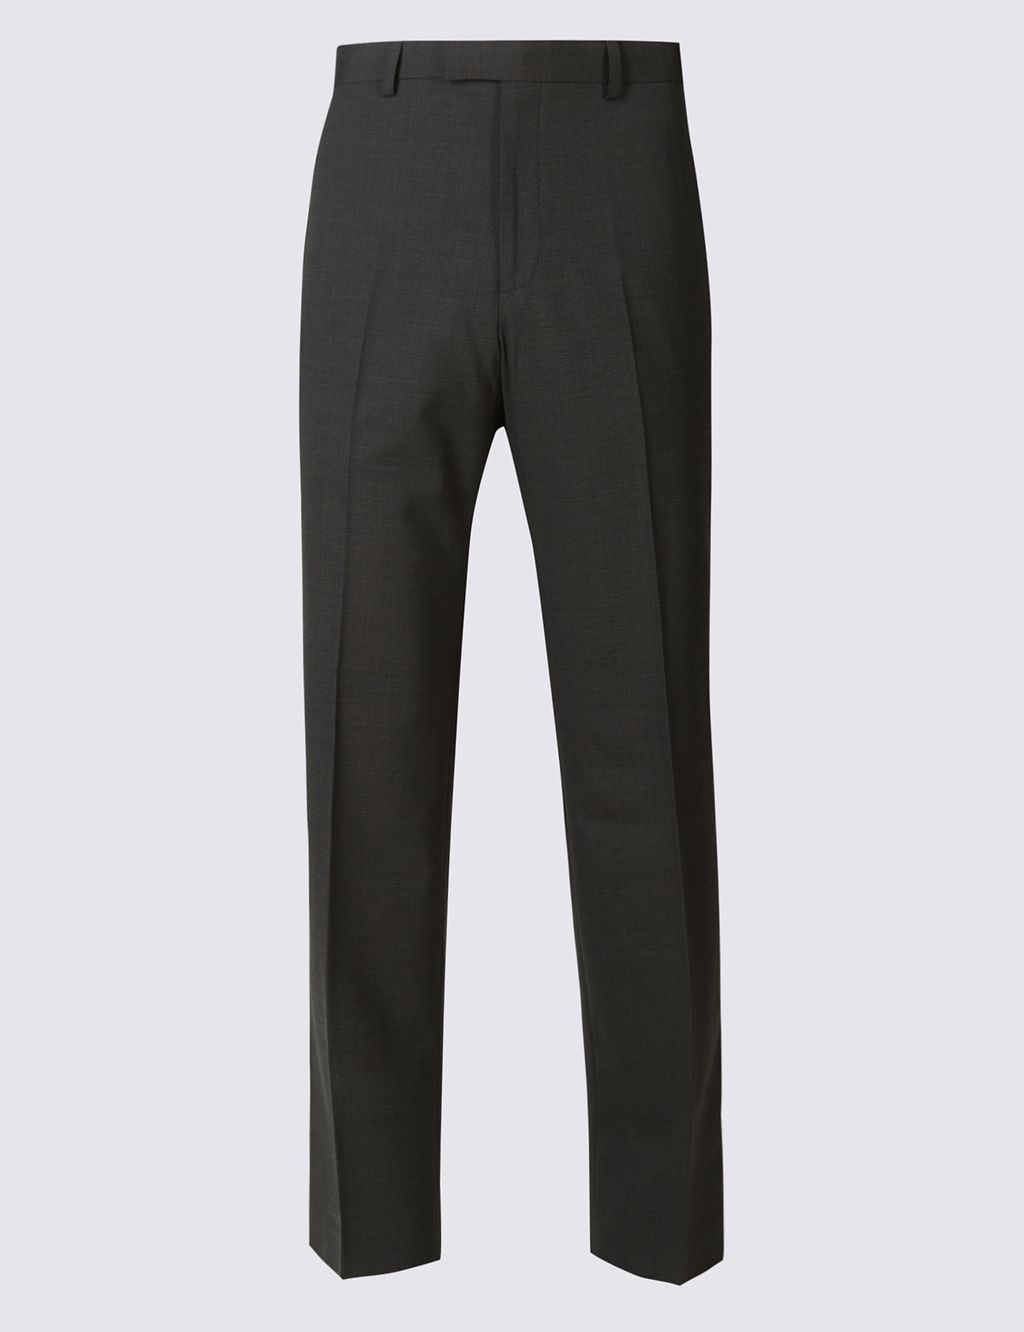 Charcoal Textured Regular Fit Trousers 1 of 7